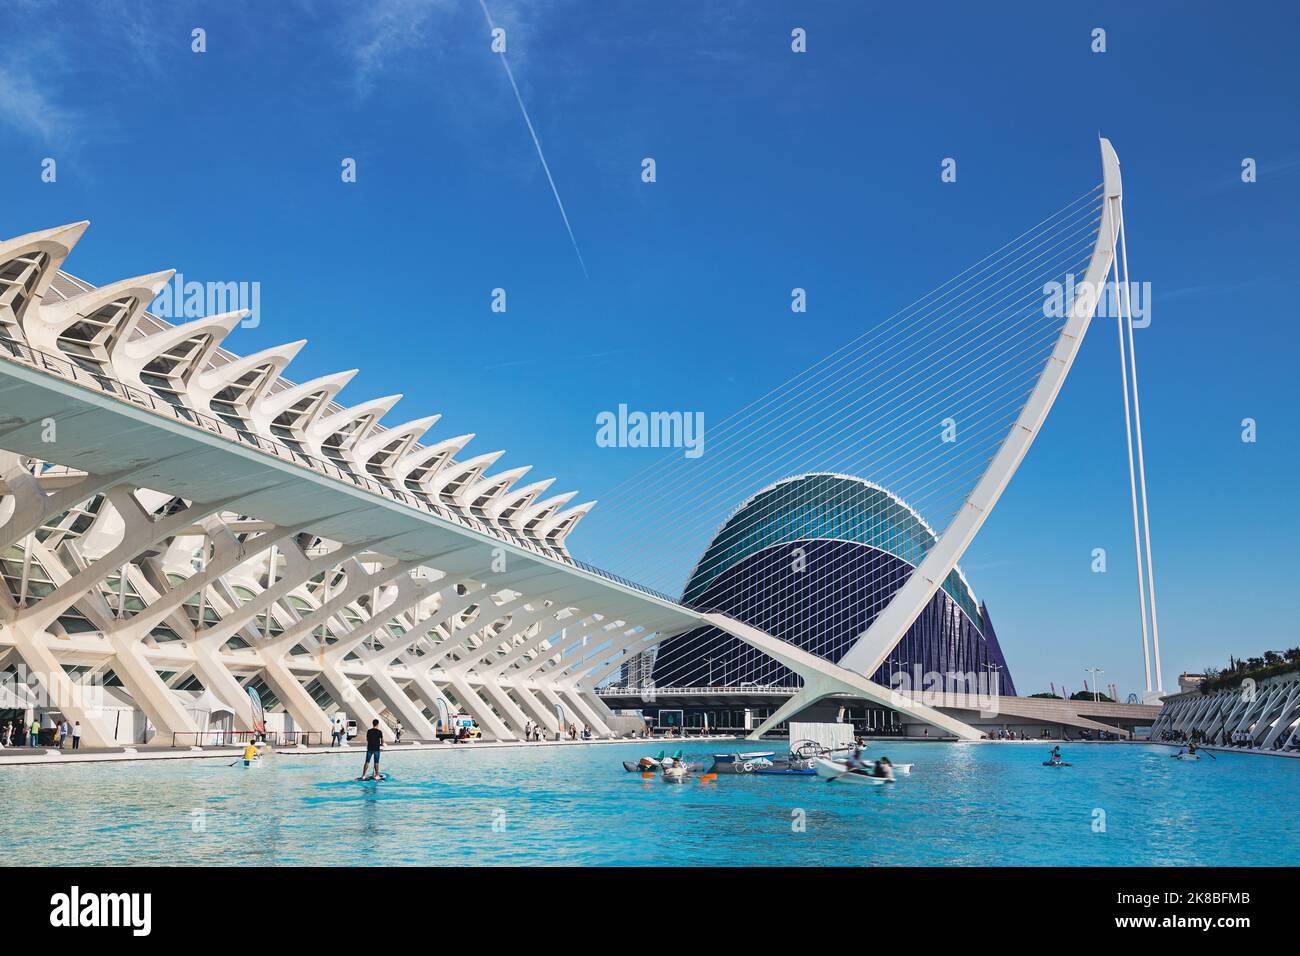 VALENCIA, SPAIN - October 15, 2022: The city of the Arts and Sciences at sunset in the rays of light in Valencia, Spain. The City of Arts and Sciences Stock Photo